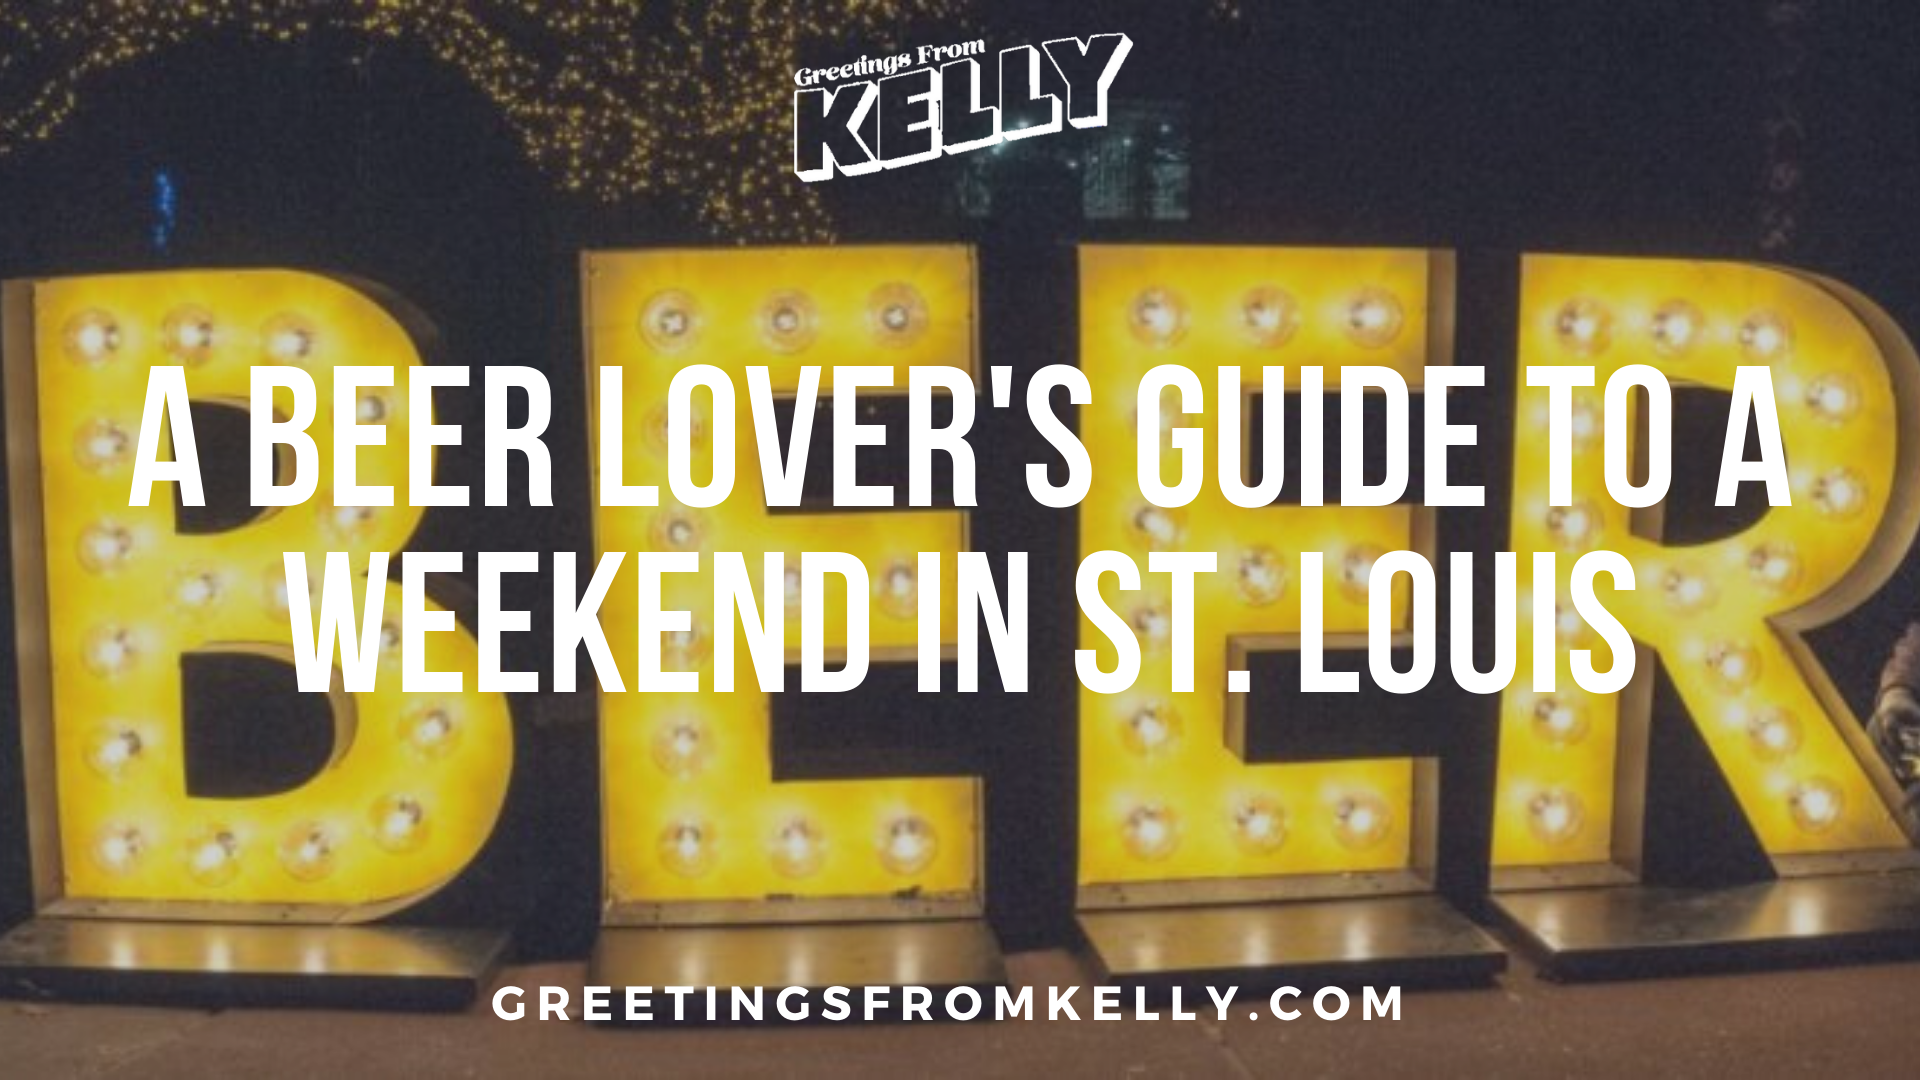 The Ultimate Beer Lover’s Guide to a Weekend in St Louis